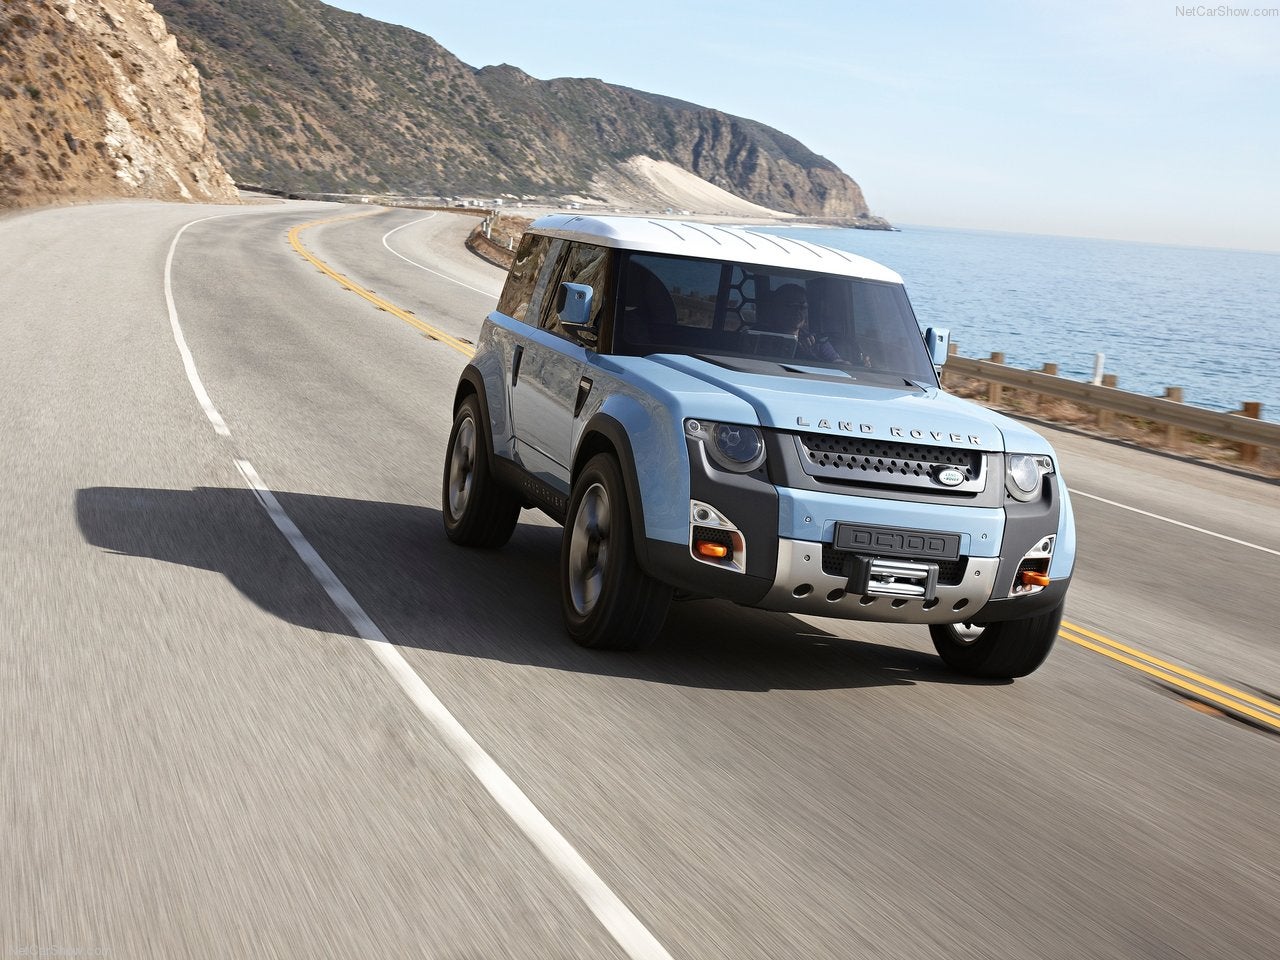 Land Rover Dc100 Wallpapers